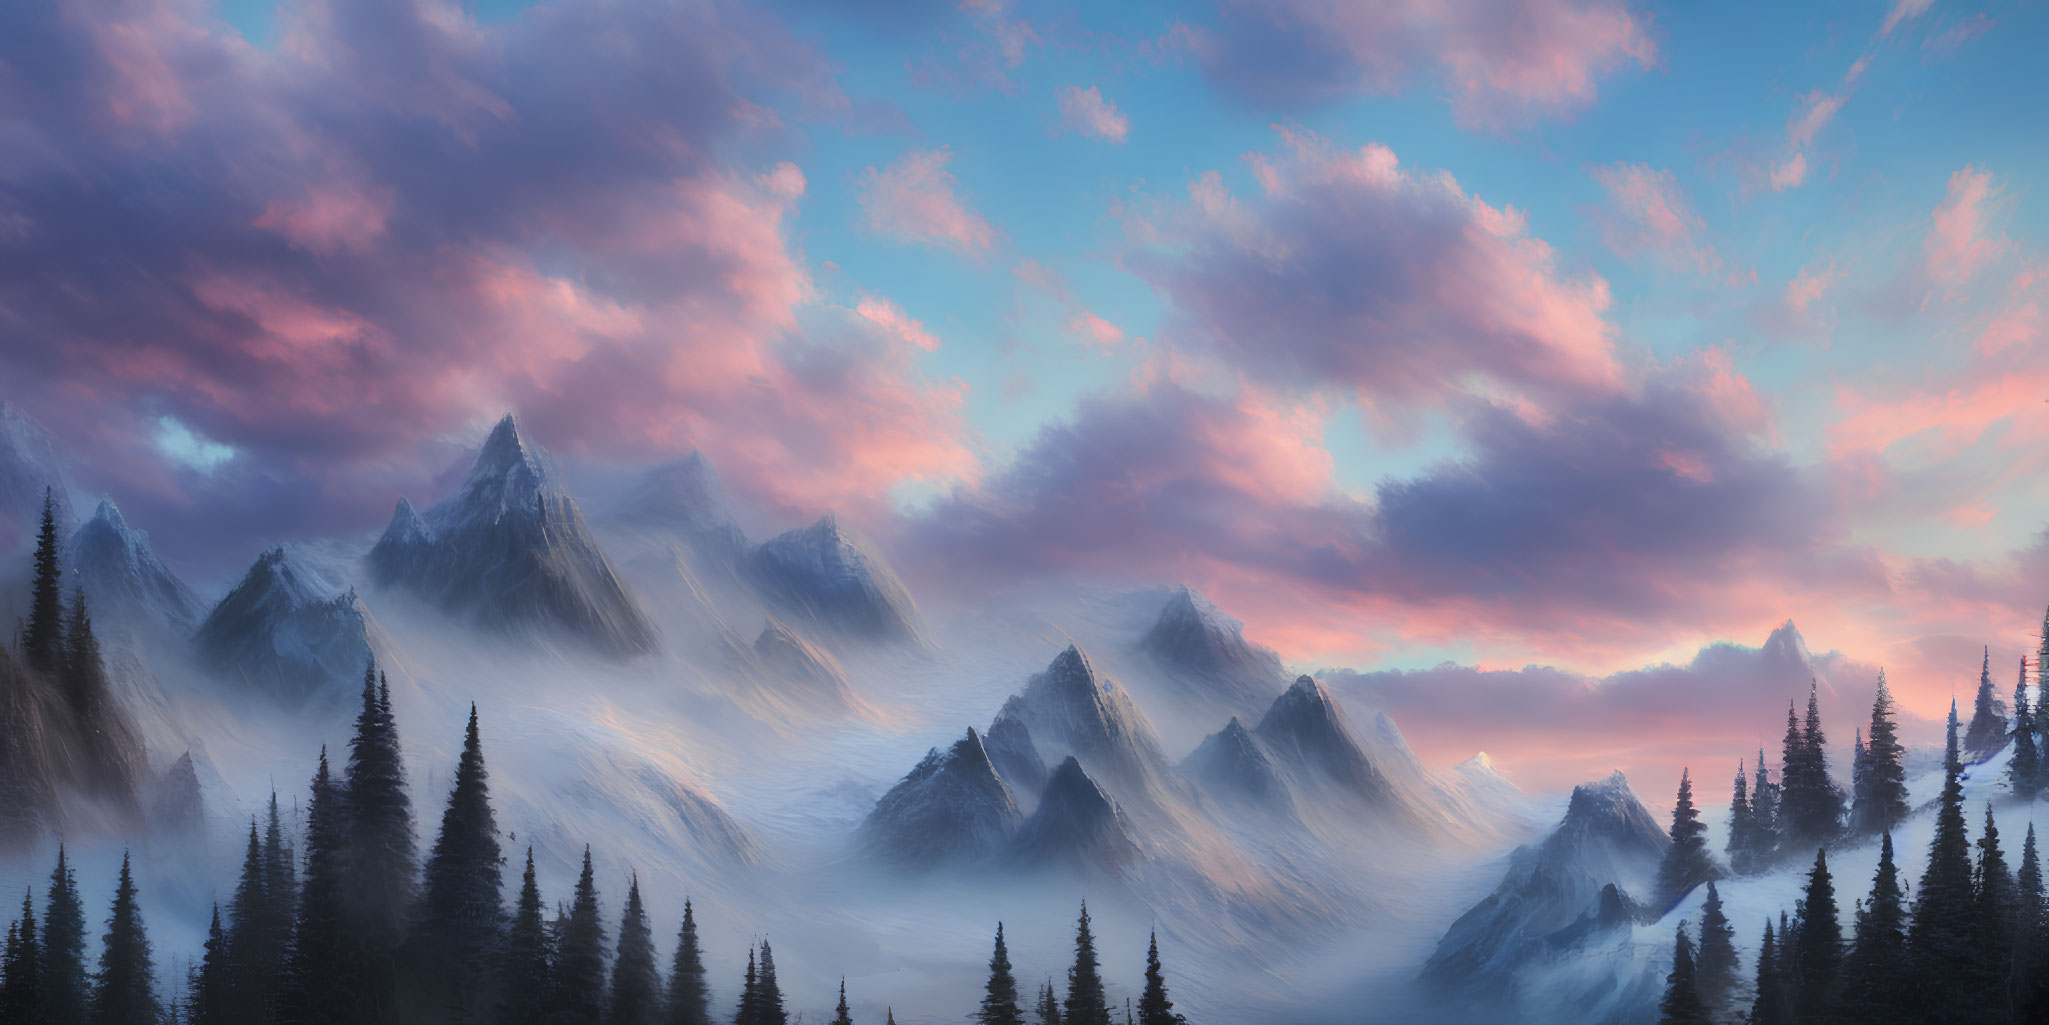 Majestic snow-capped mountains under vibrant pink and blue sky